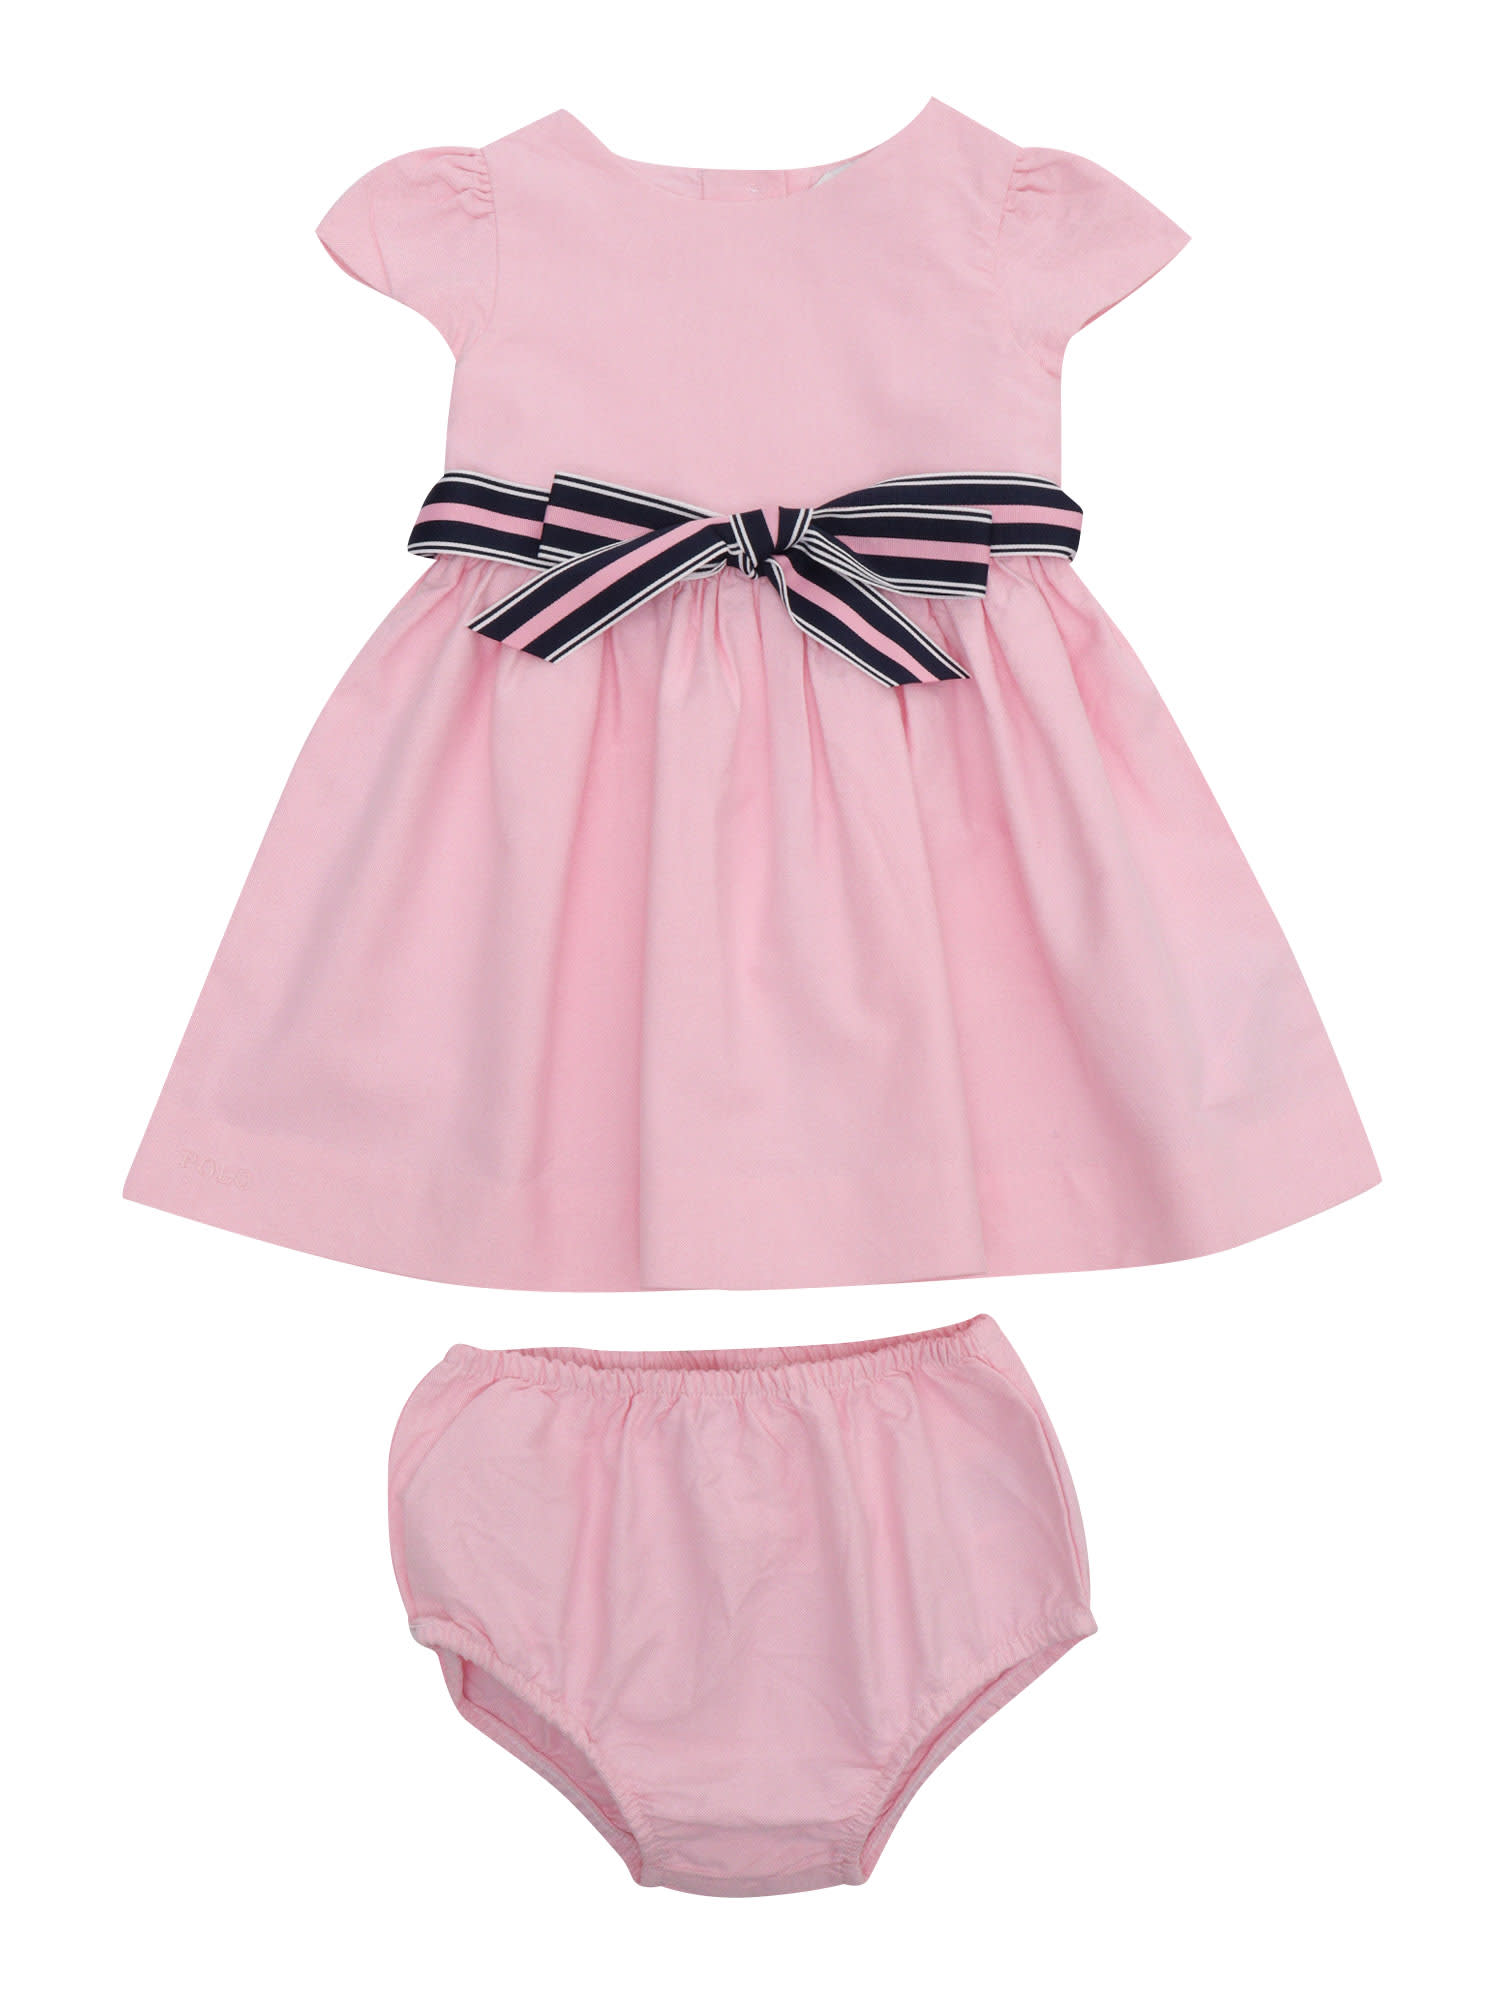 Polo Ralph Lauren Kids' Pink Dress With Bow